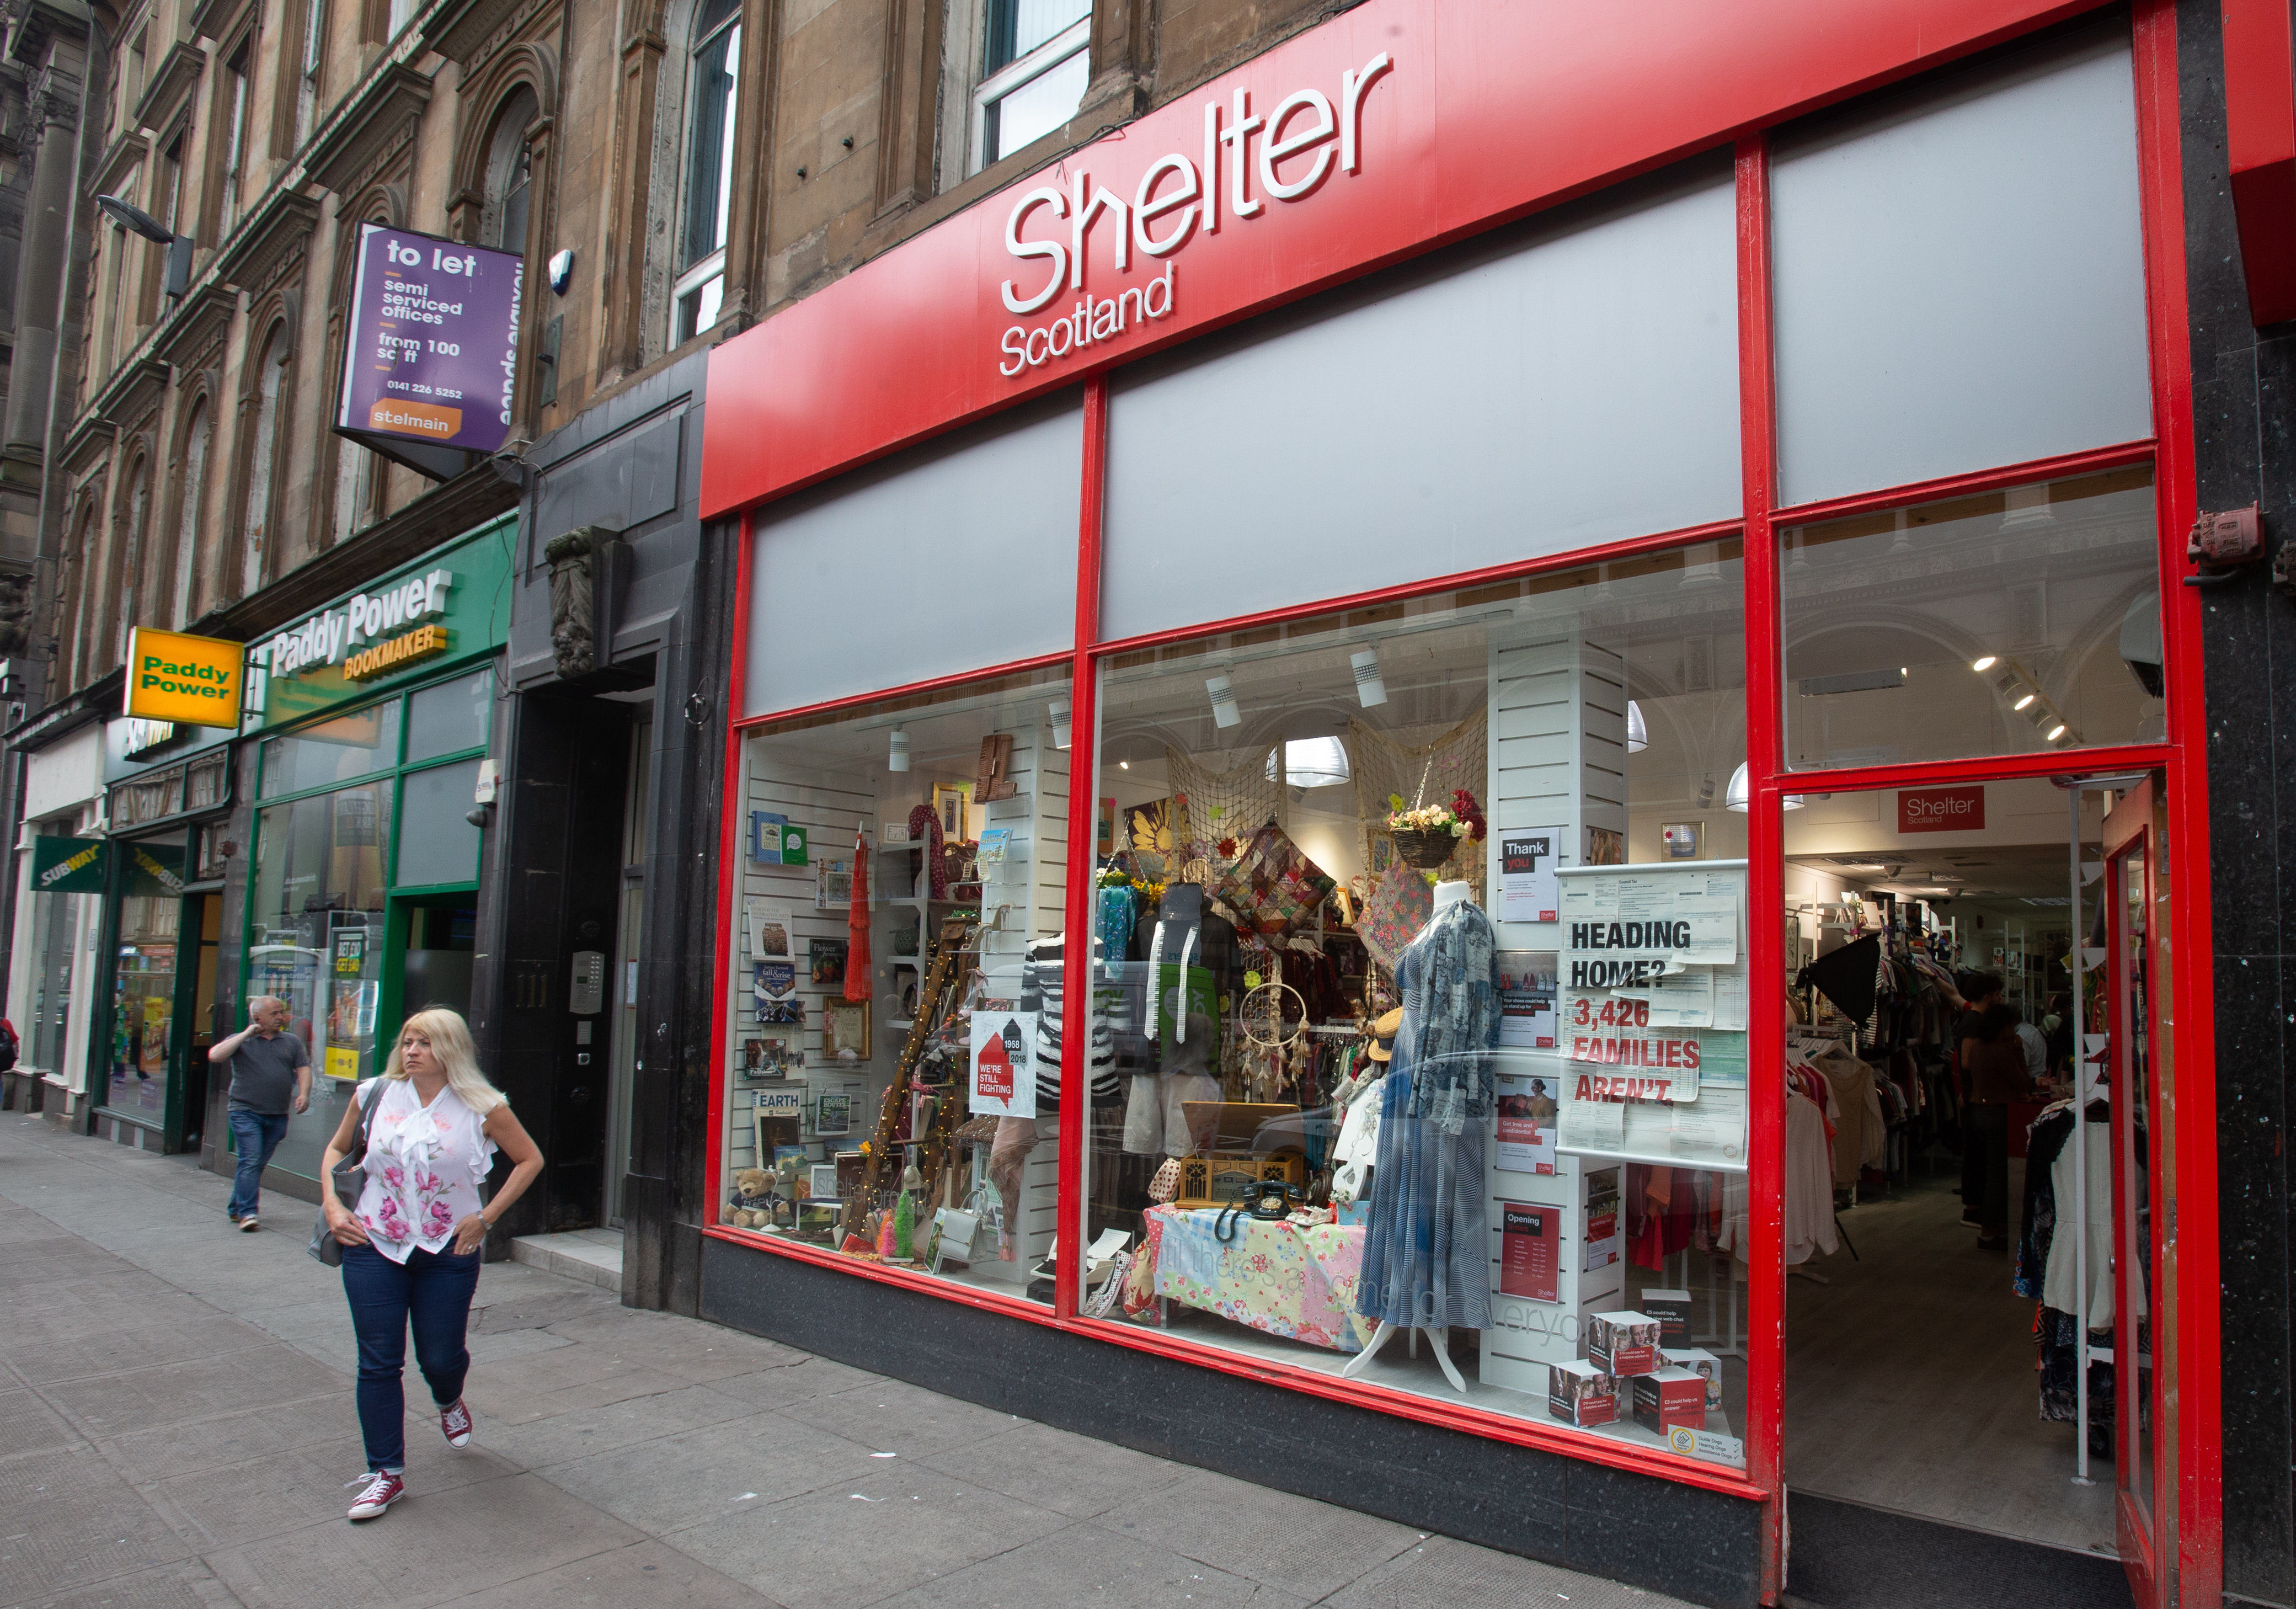 Shelter Scotland shops opening up to receive donations